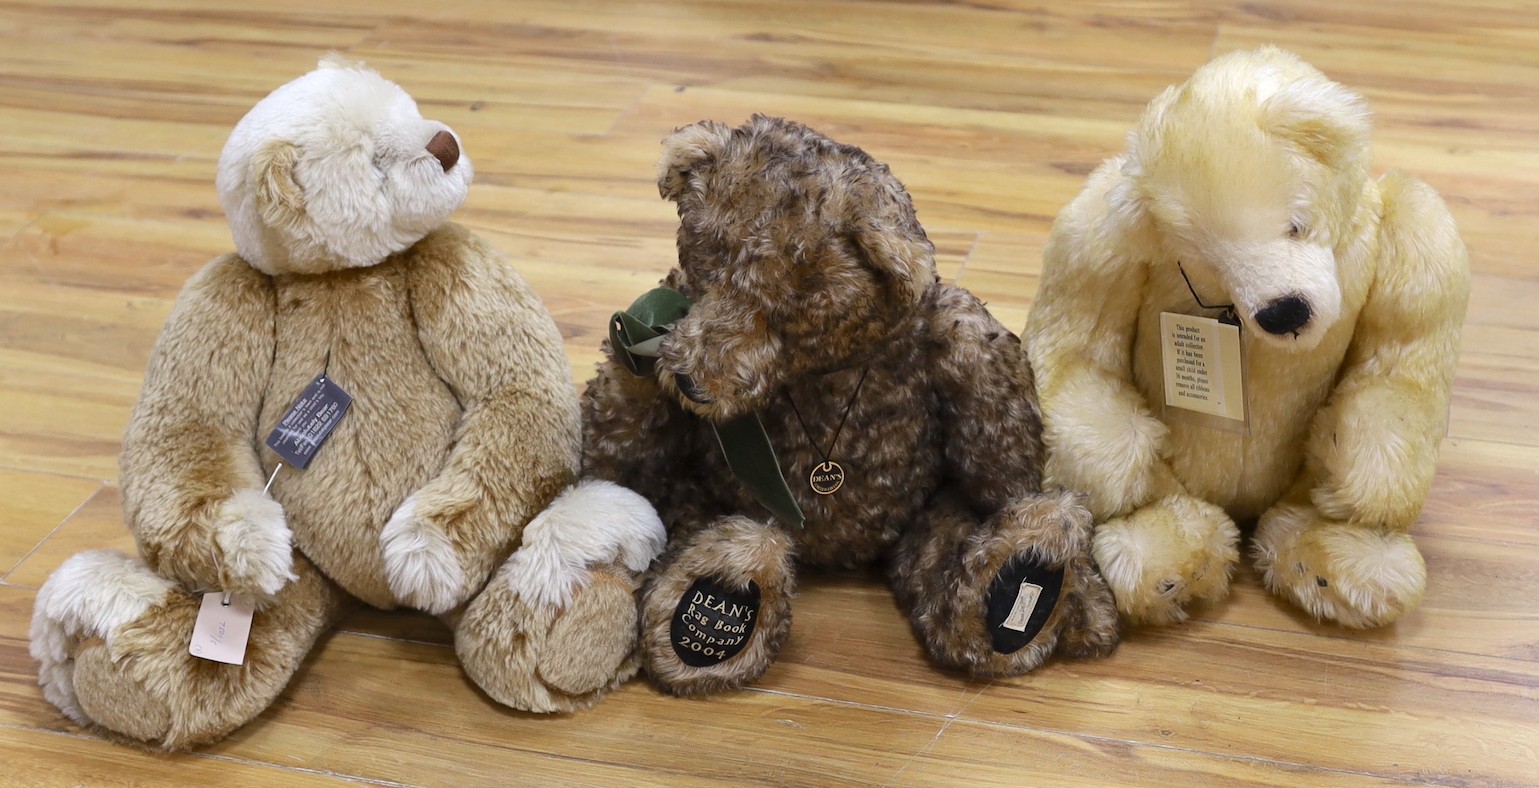 Two Deans Teddy bears, ‘Lemon Squeezy’ and limited edition Teddy bear of the Year, 2004, and an Absolutely Bear (3)